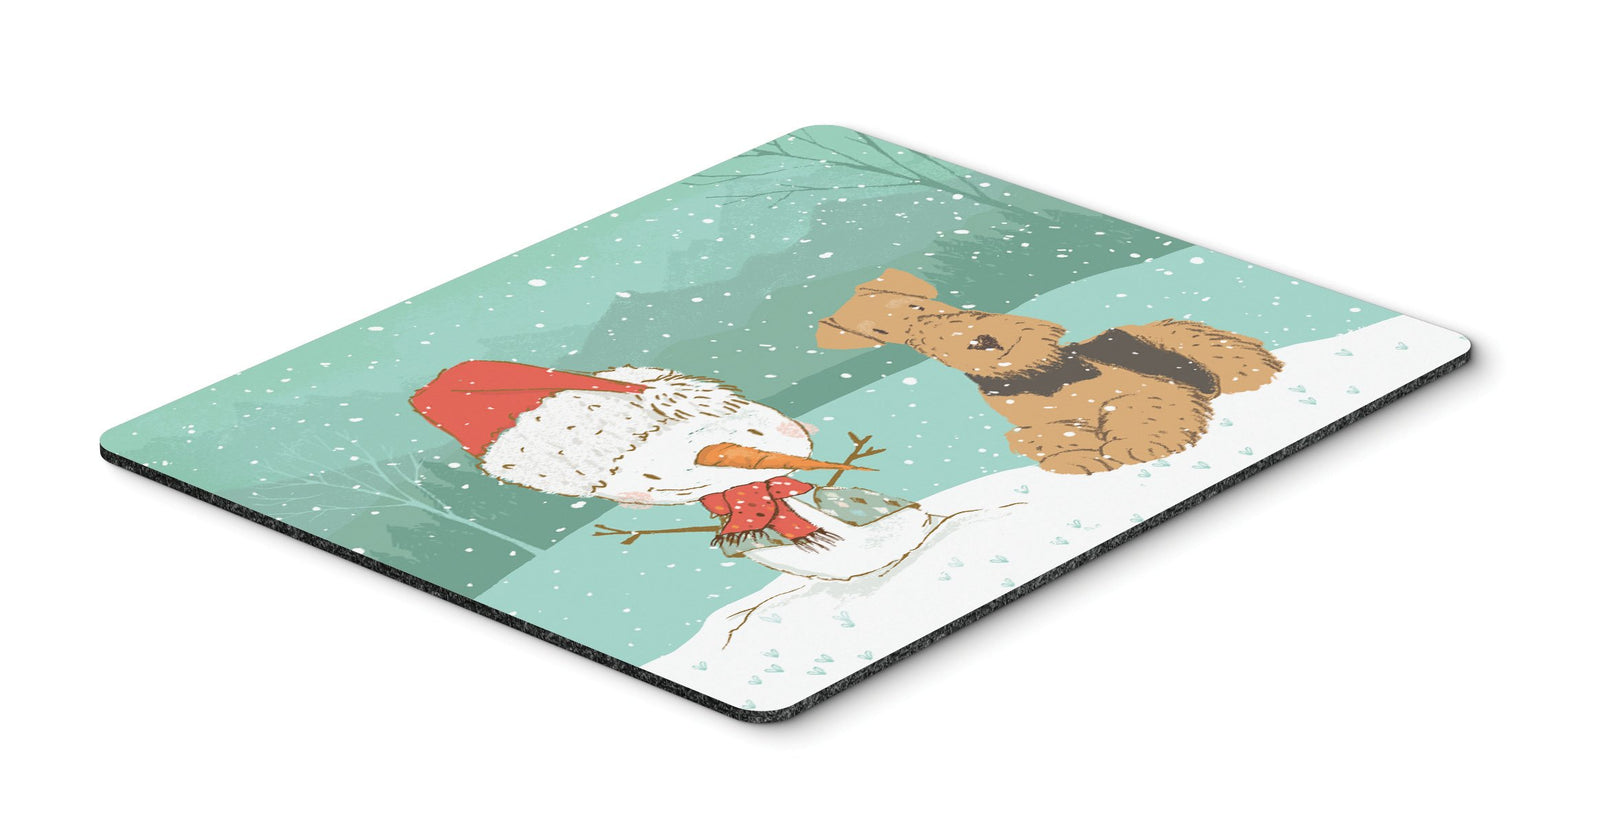 Airedale Terrier Snowman Christmas Mouse Pad, Hot Pad or Trivet CK2078MP by Caroline's Treasures